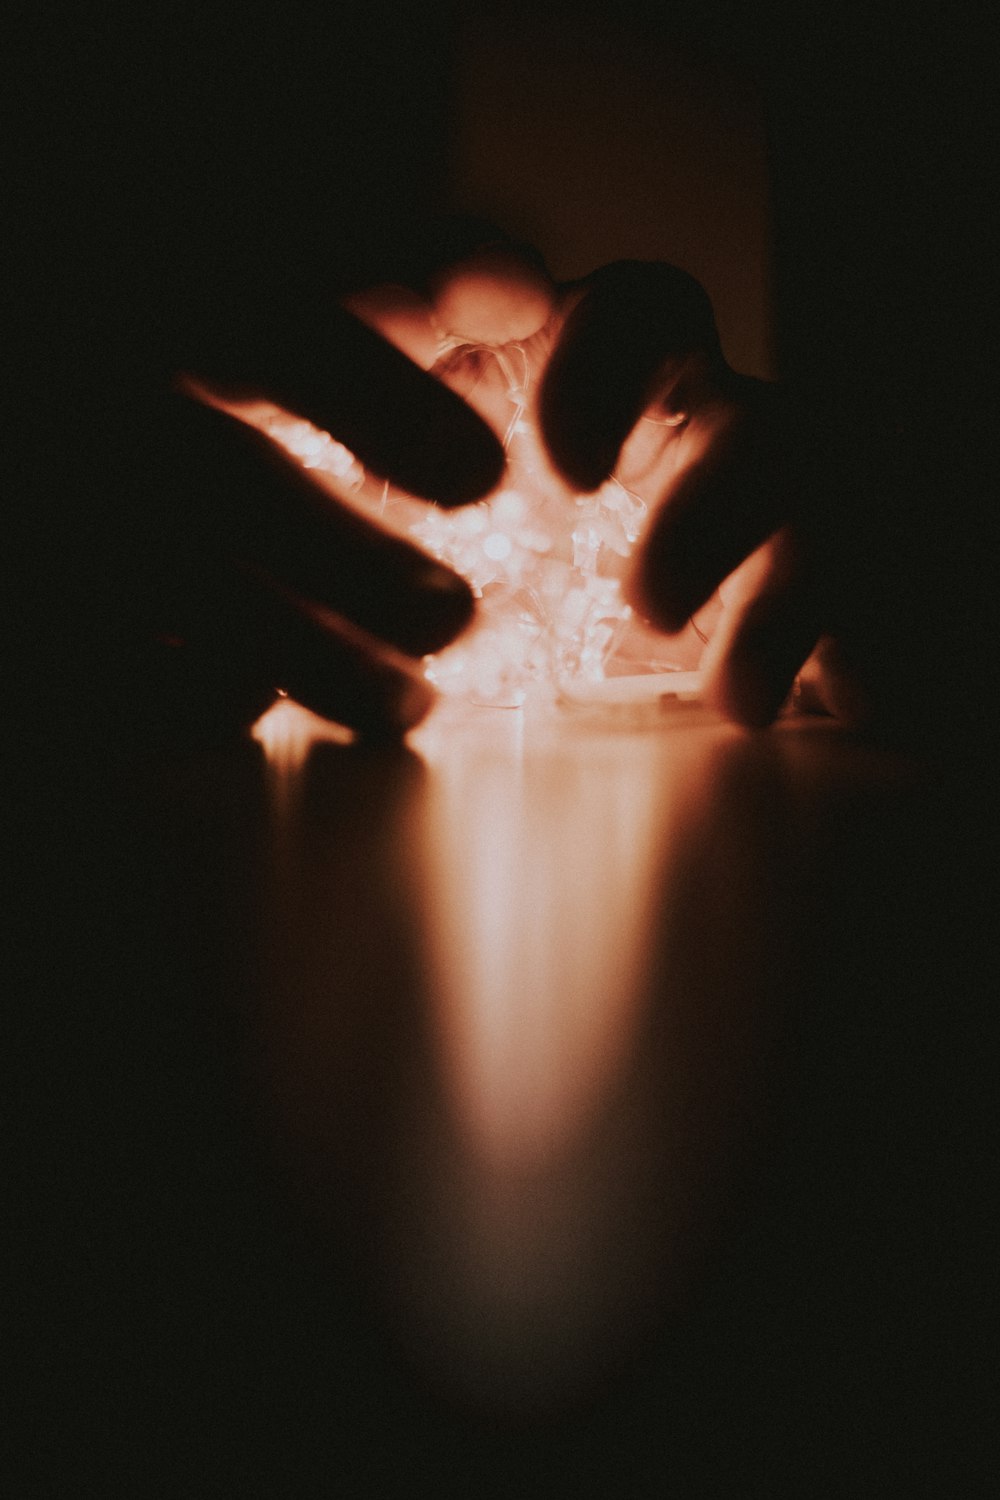 a person holding a lit object in their hands